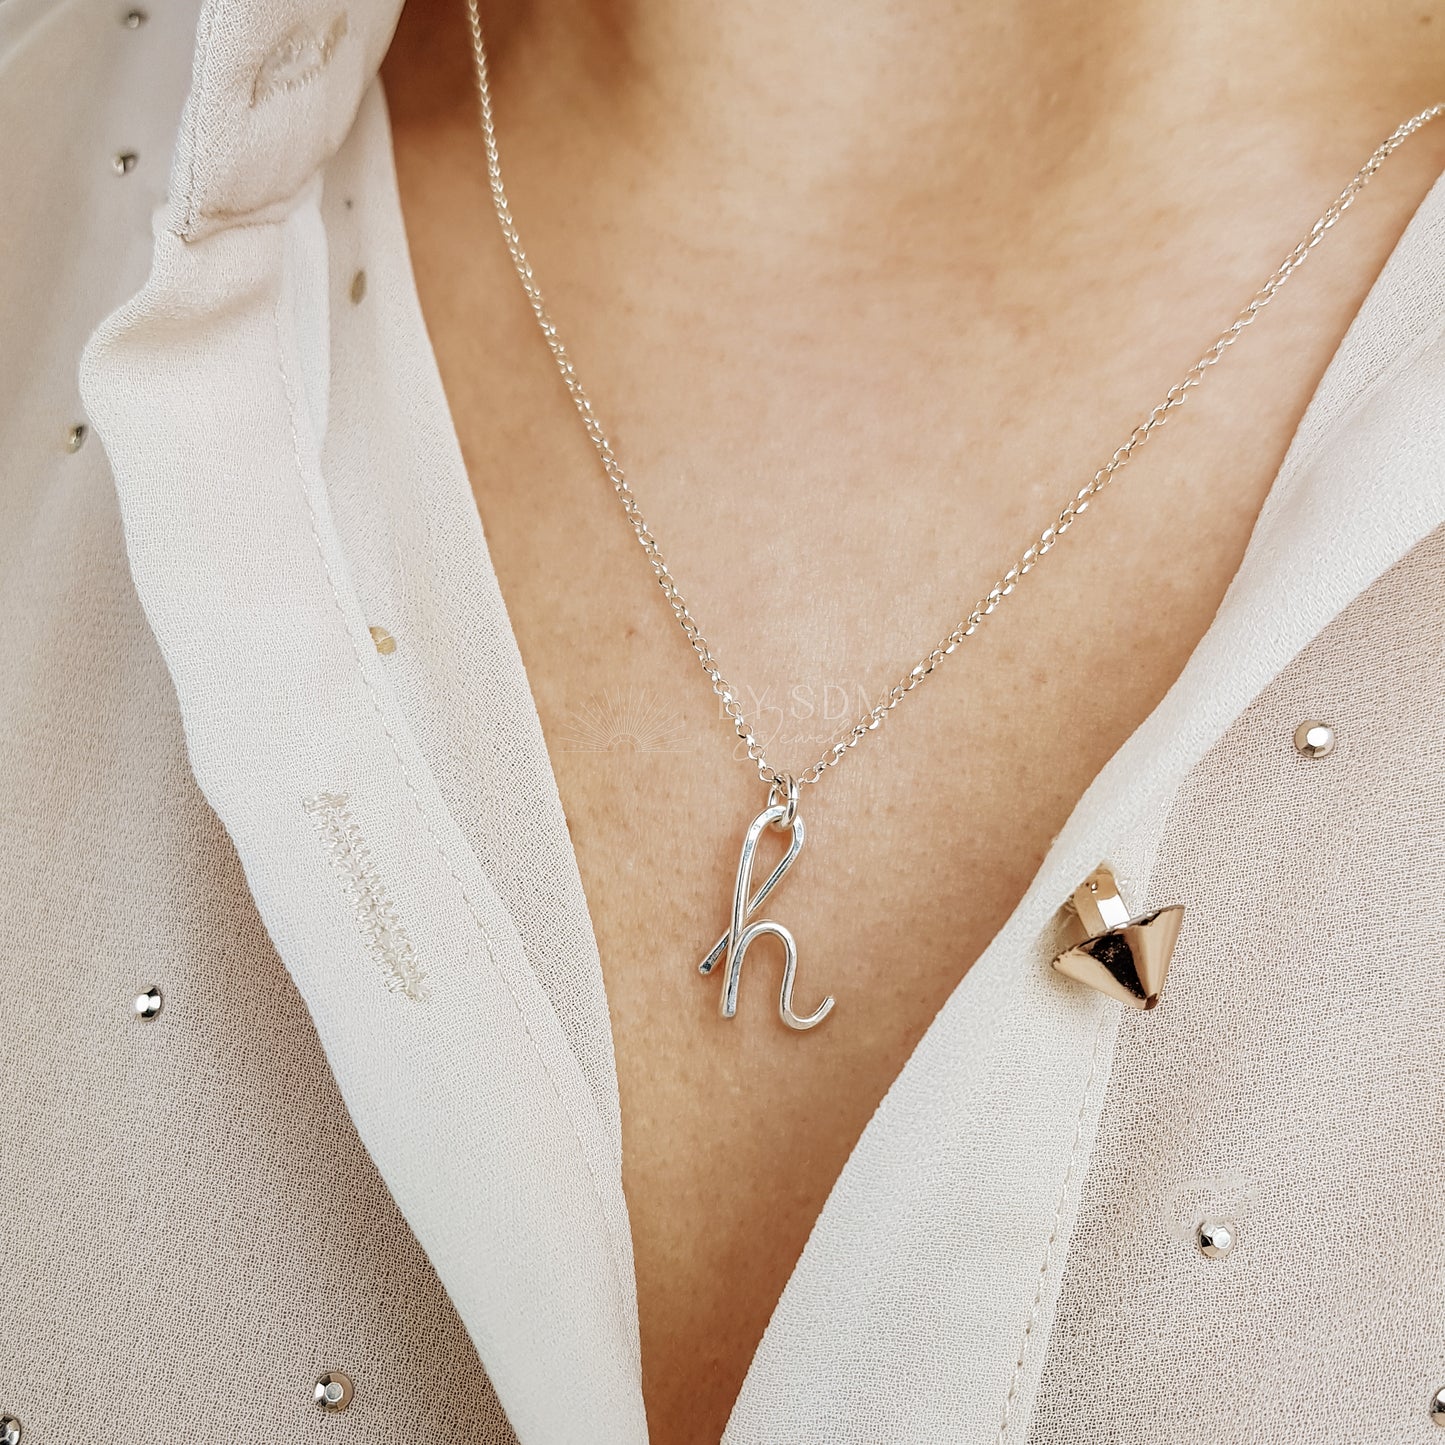 M Initial Necklace • Personalized Name Necklace • Letter Necklace • Gold Necklace • Wife Gifts • Gifts For Mom • Moms Gift • Birthday Gift